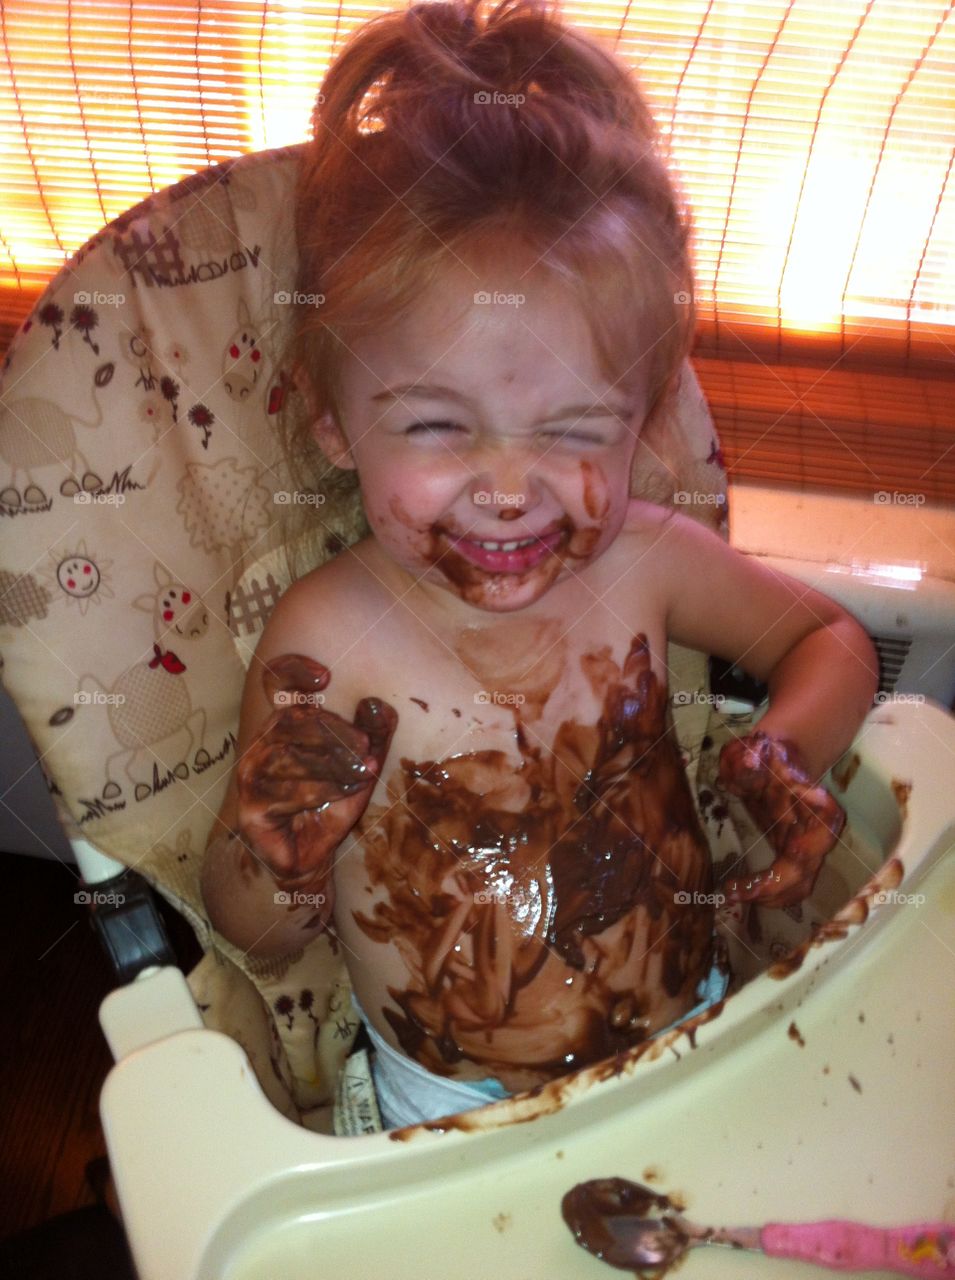 Pudding Goes in Your Mouth You Know. Toddler making a mess with chocolate pudding